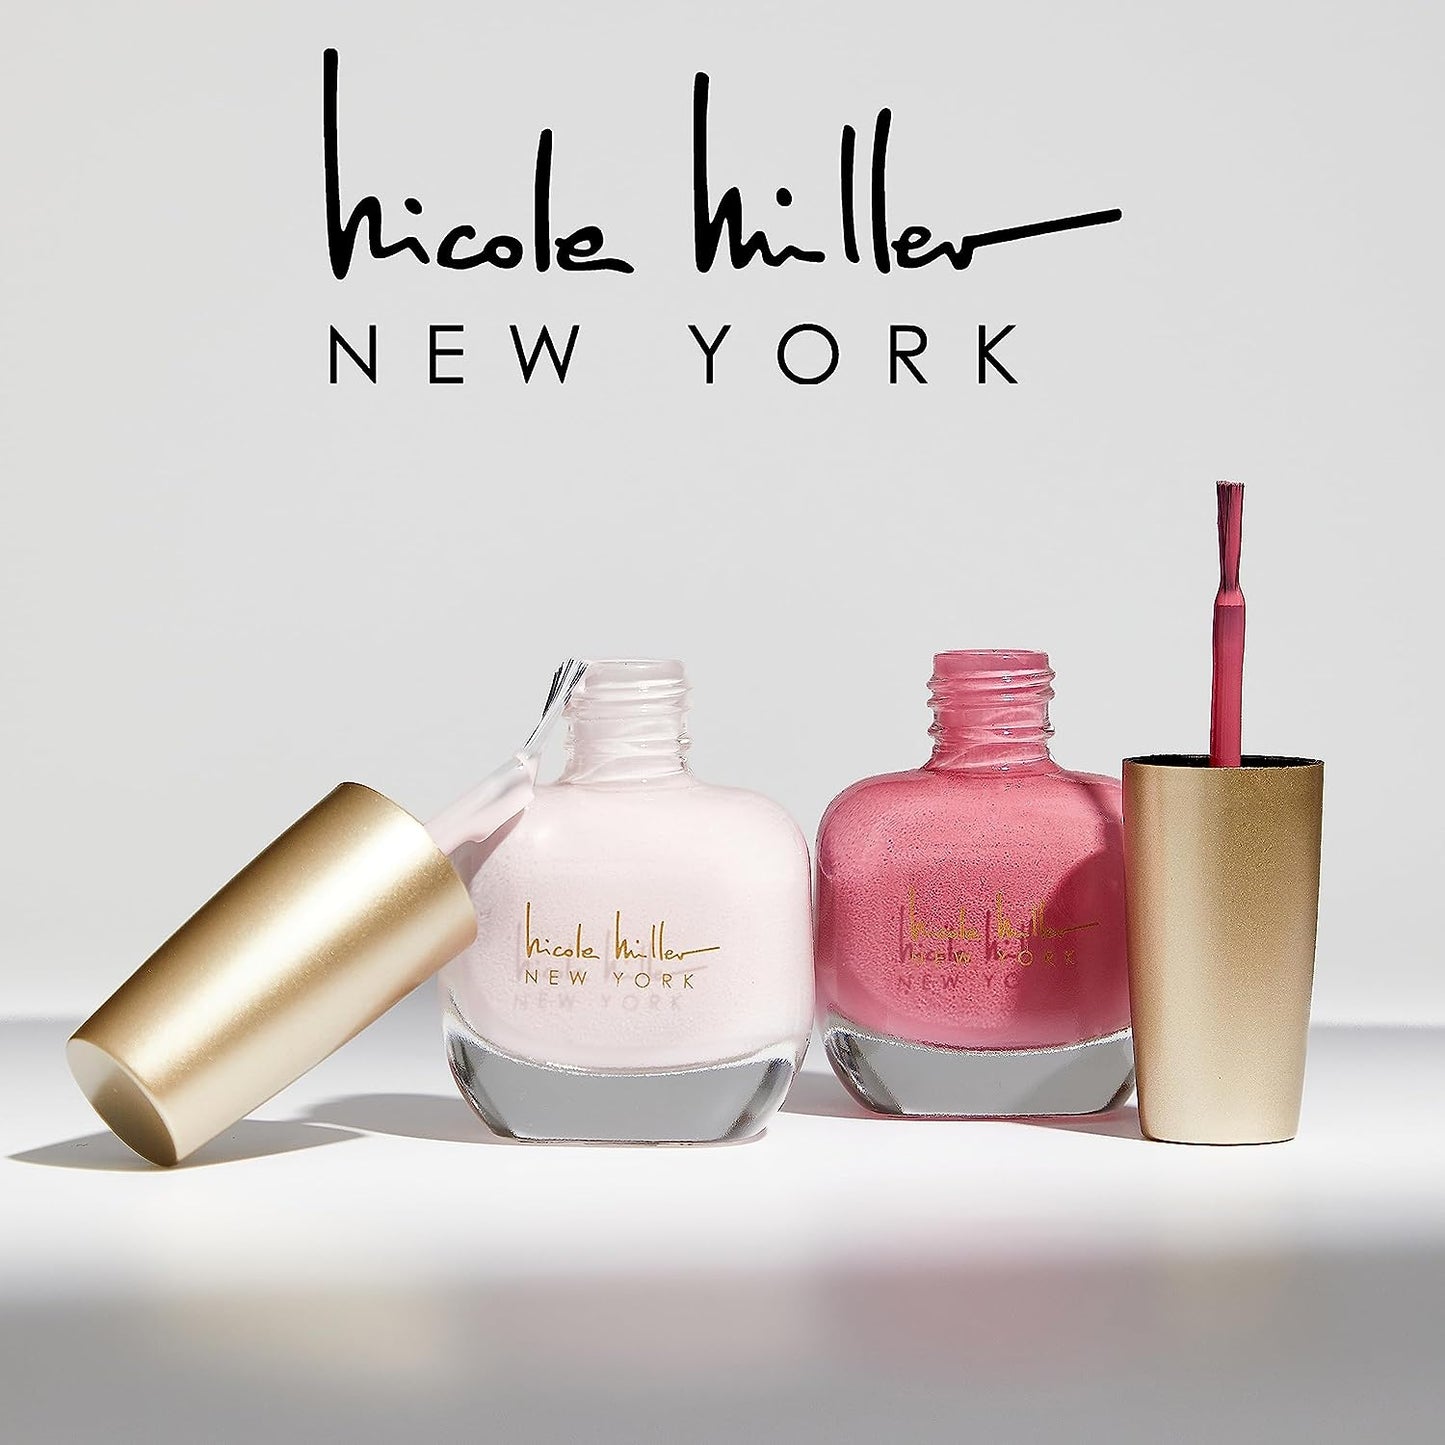 Nicole Miller Nail Polish Set: 5 Gorgeous Quick-Dry Colors for Women and Girls | 15 ML Each